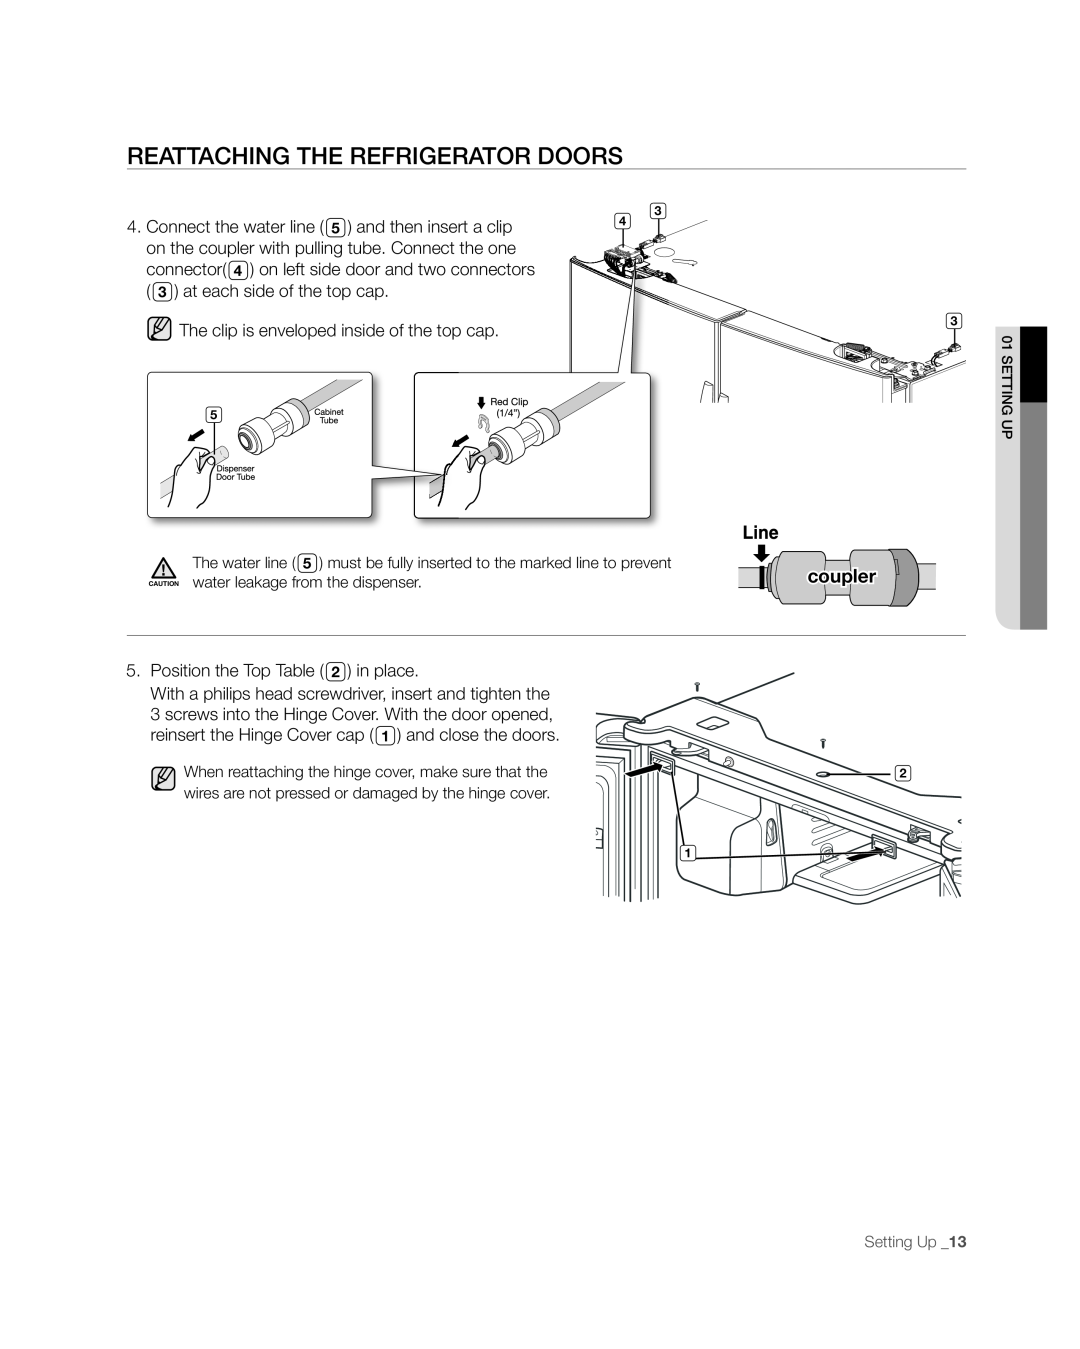 Samsung RFG297AAWP user manual REAttACHinG tHE REFRiGERAtoR DooRs, coupler, 01sEttinG uP 